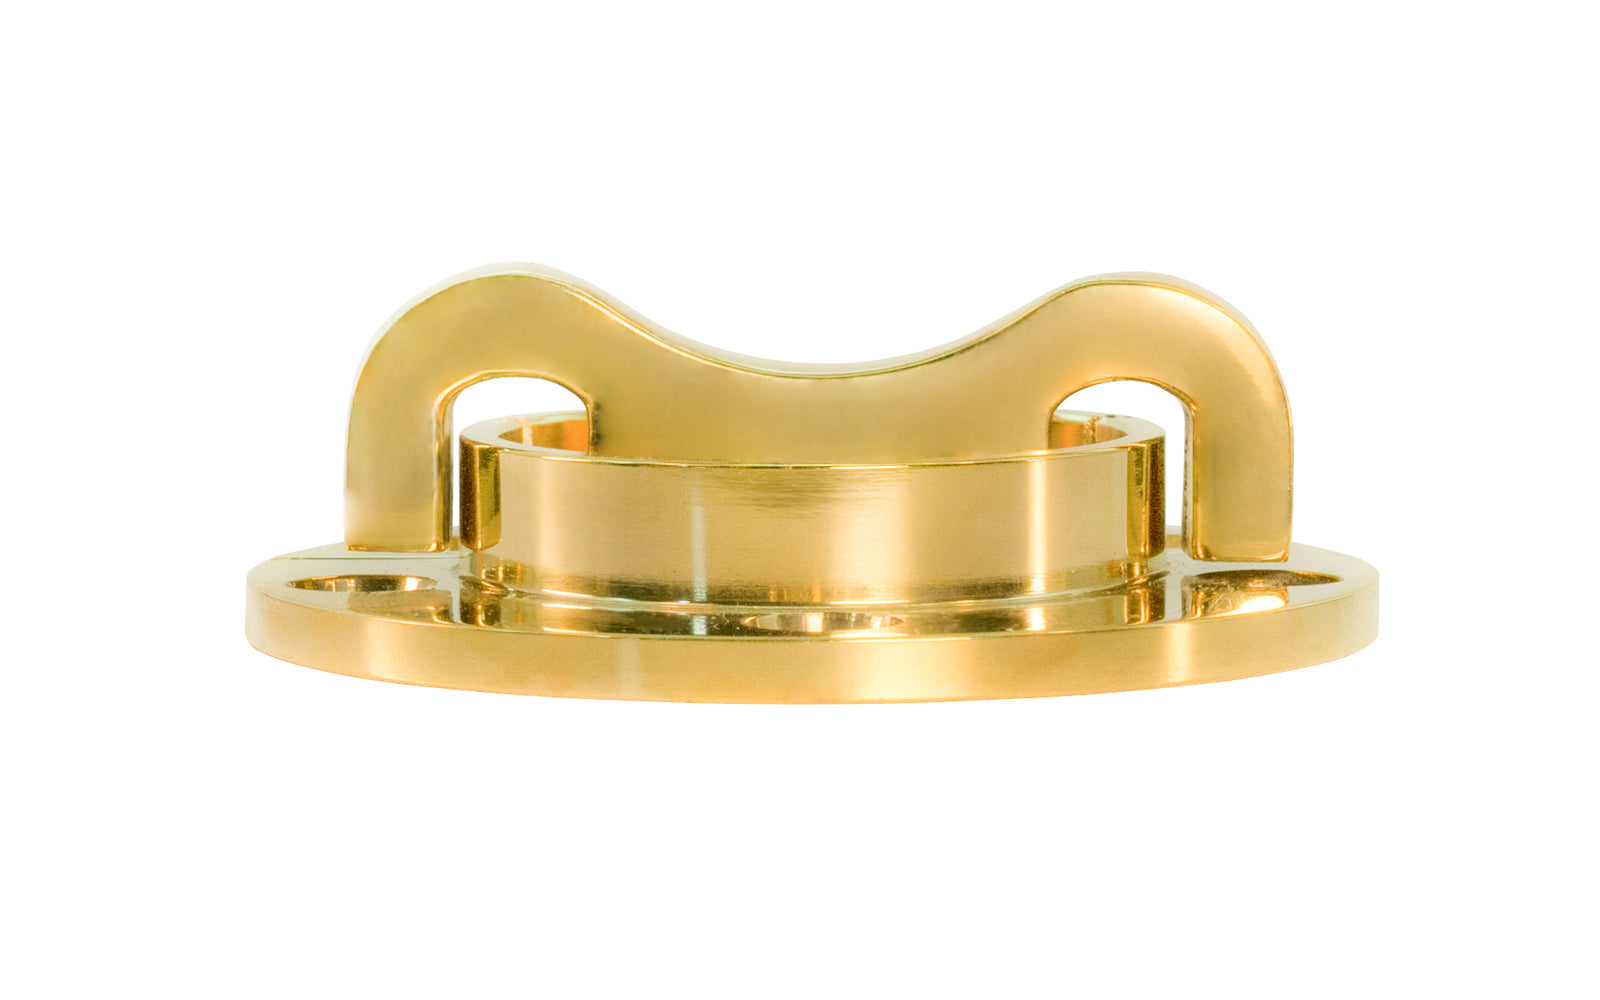 Solid Brass 2" Diameter Turn-Catch. Unlacquered brass. Surface-mount catch & turn that is good for flush cabinet doors, & doors that swing in & out. Other uses include for use as a table catch, cabinets, cupboards, chests, ice boxes, hatches, lids, panels, & also can be used on boats & boat cabinets as well.